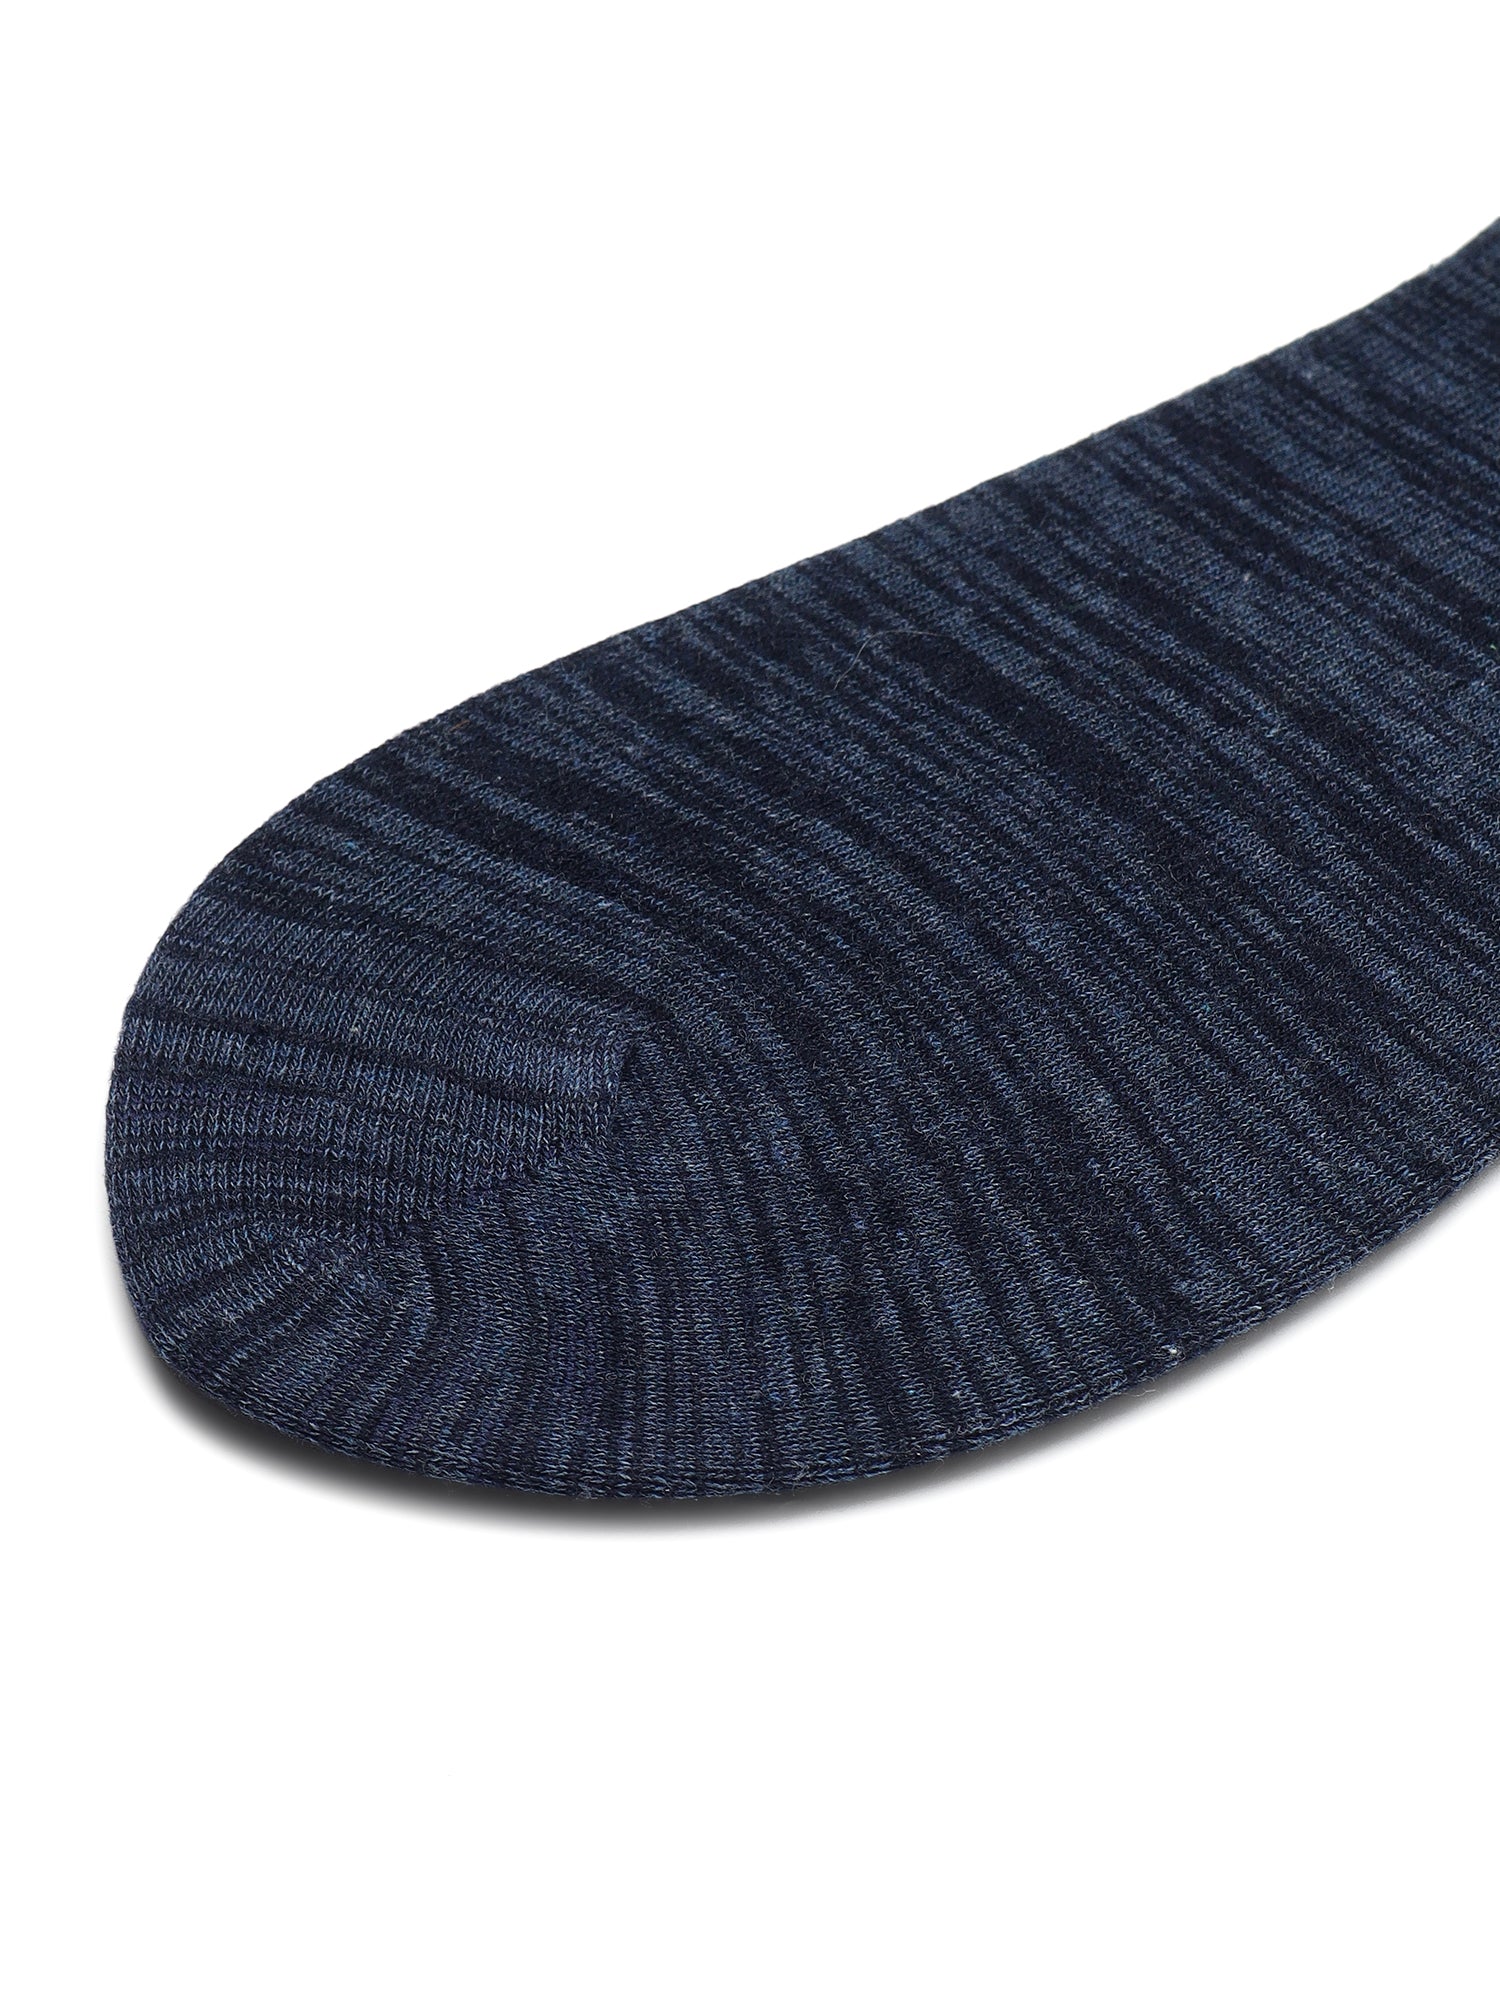 Tipped to Perfection - Twintone Navy with Red Tip Socks